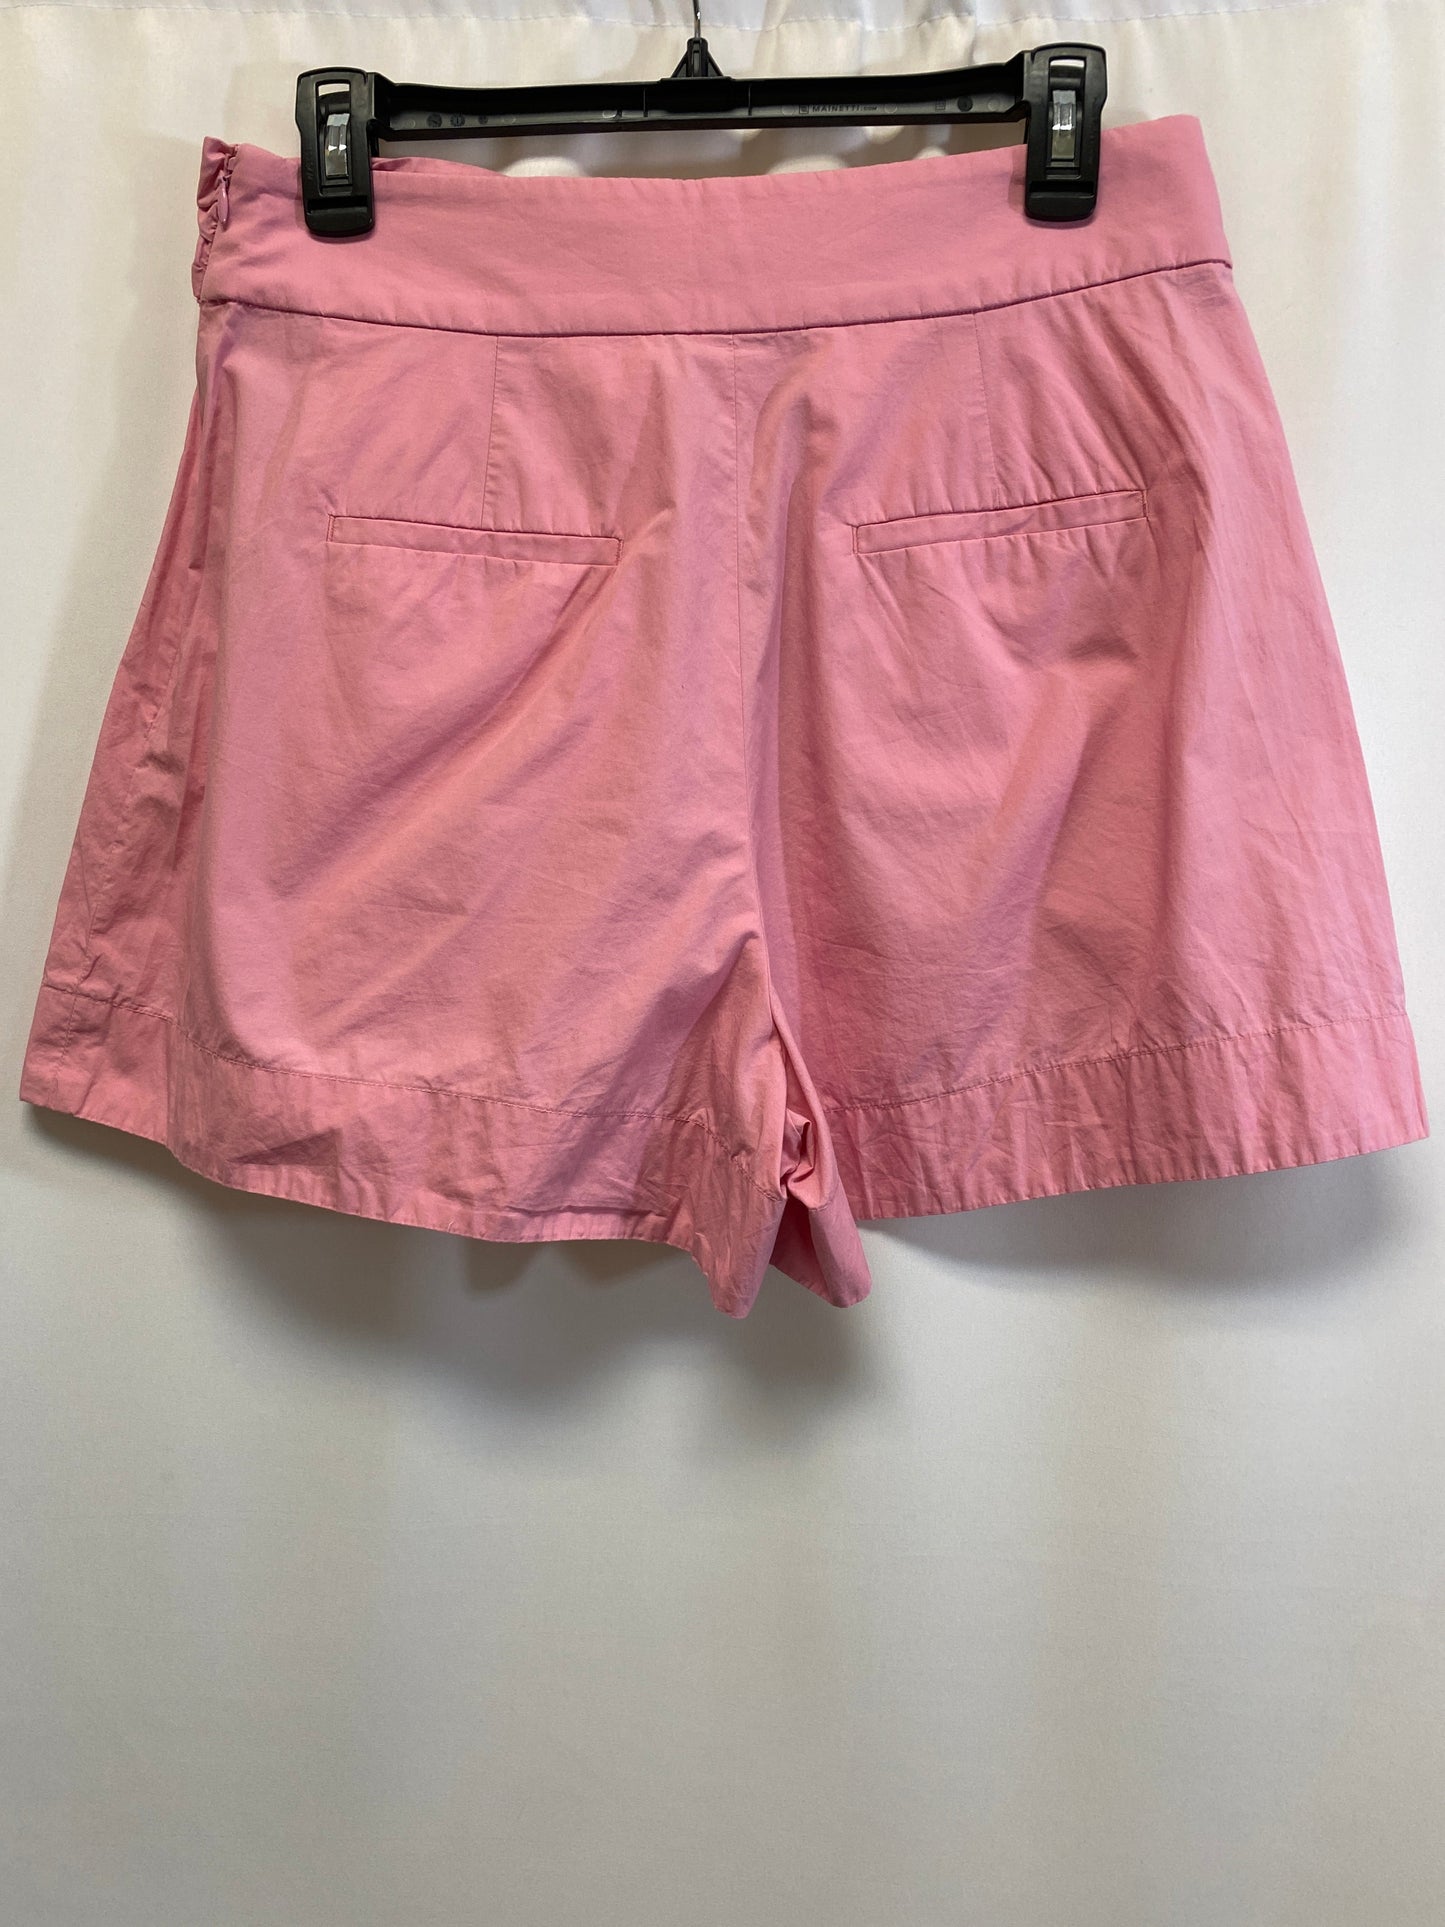 Shorts By J. Crew  Size: 6